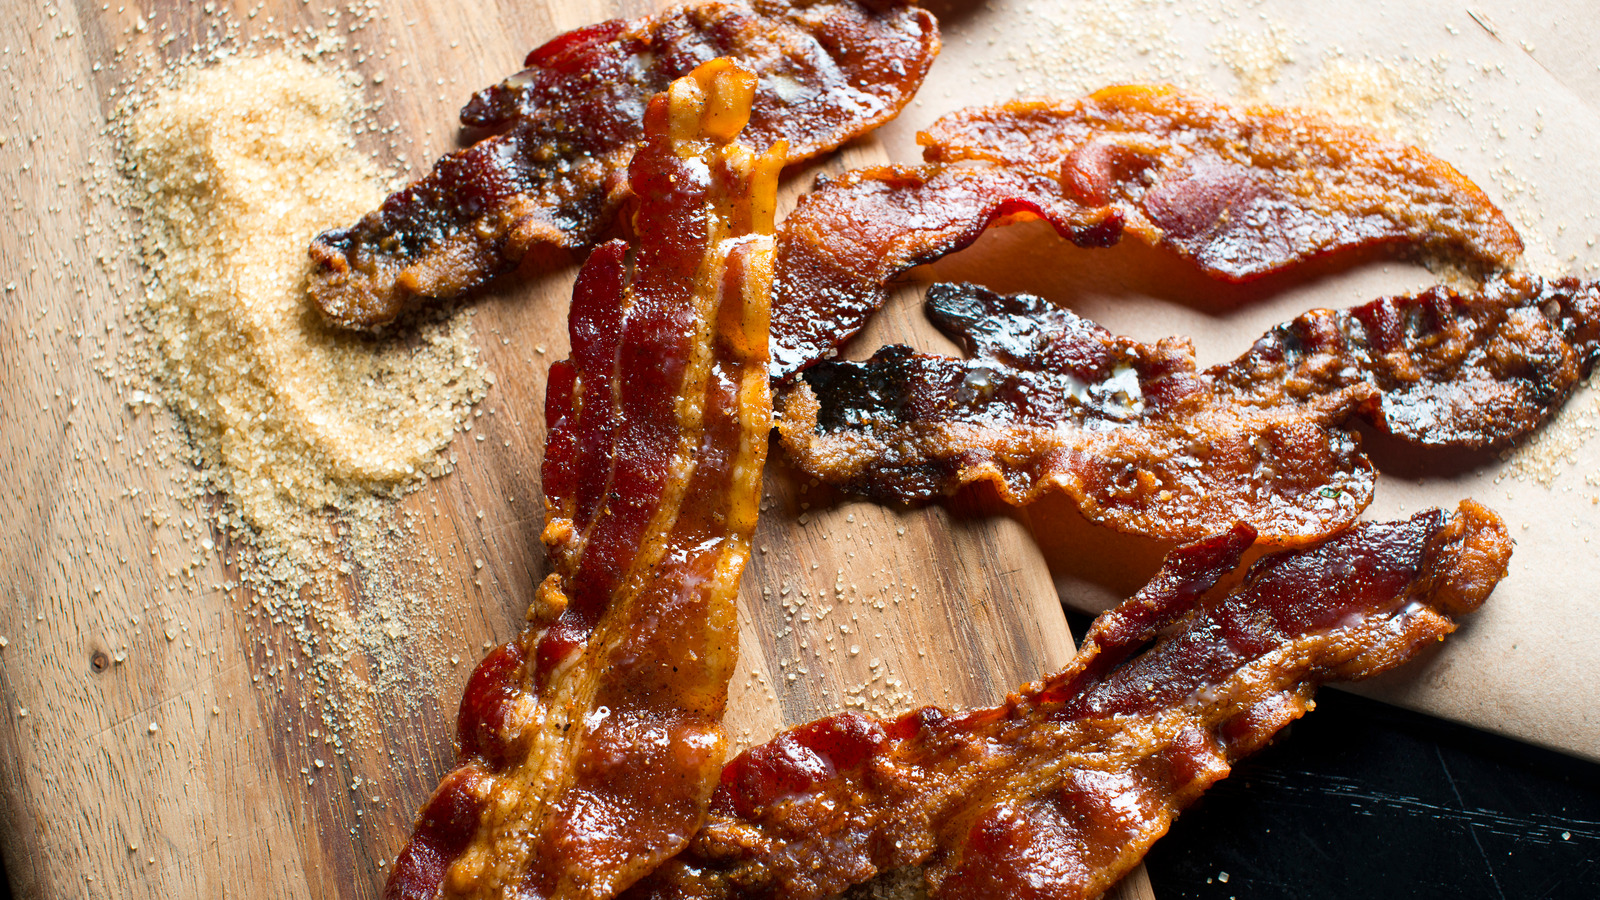 Coat bacon with brown sugar and chili flakes for intense flavor